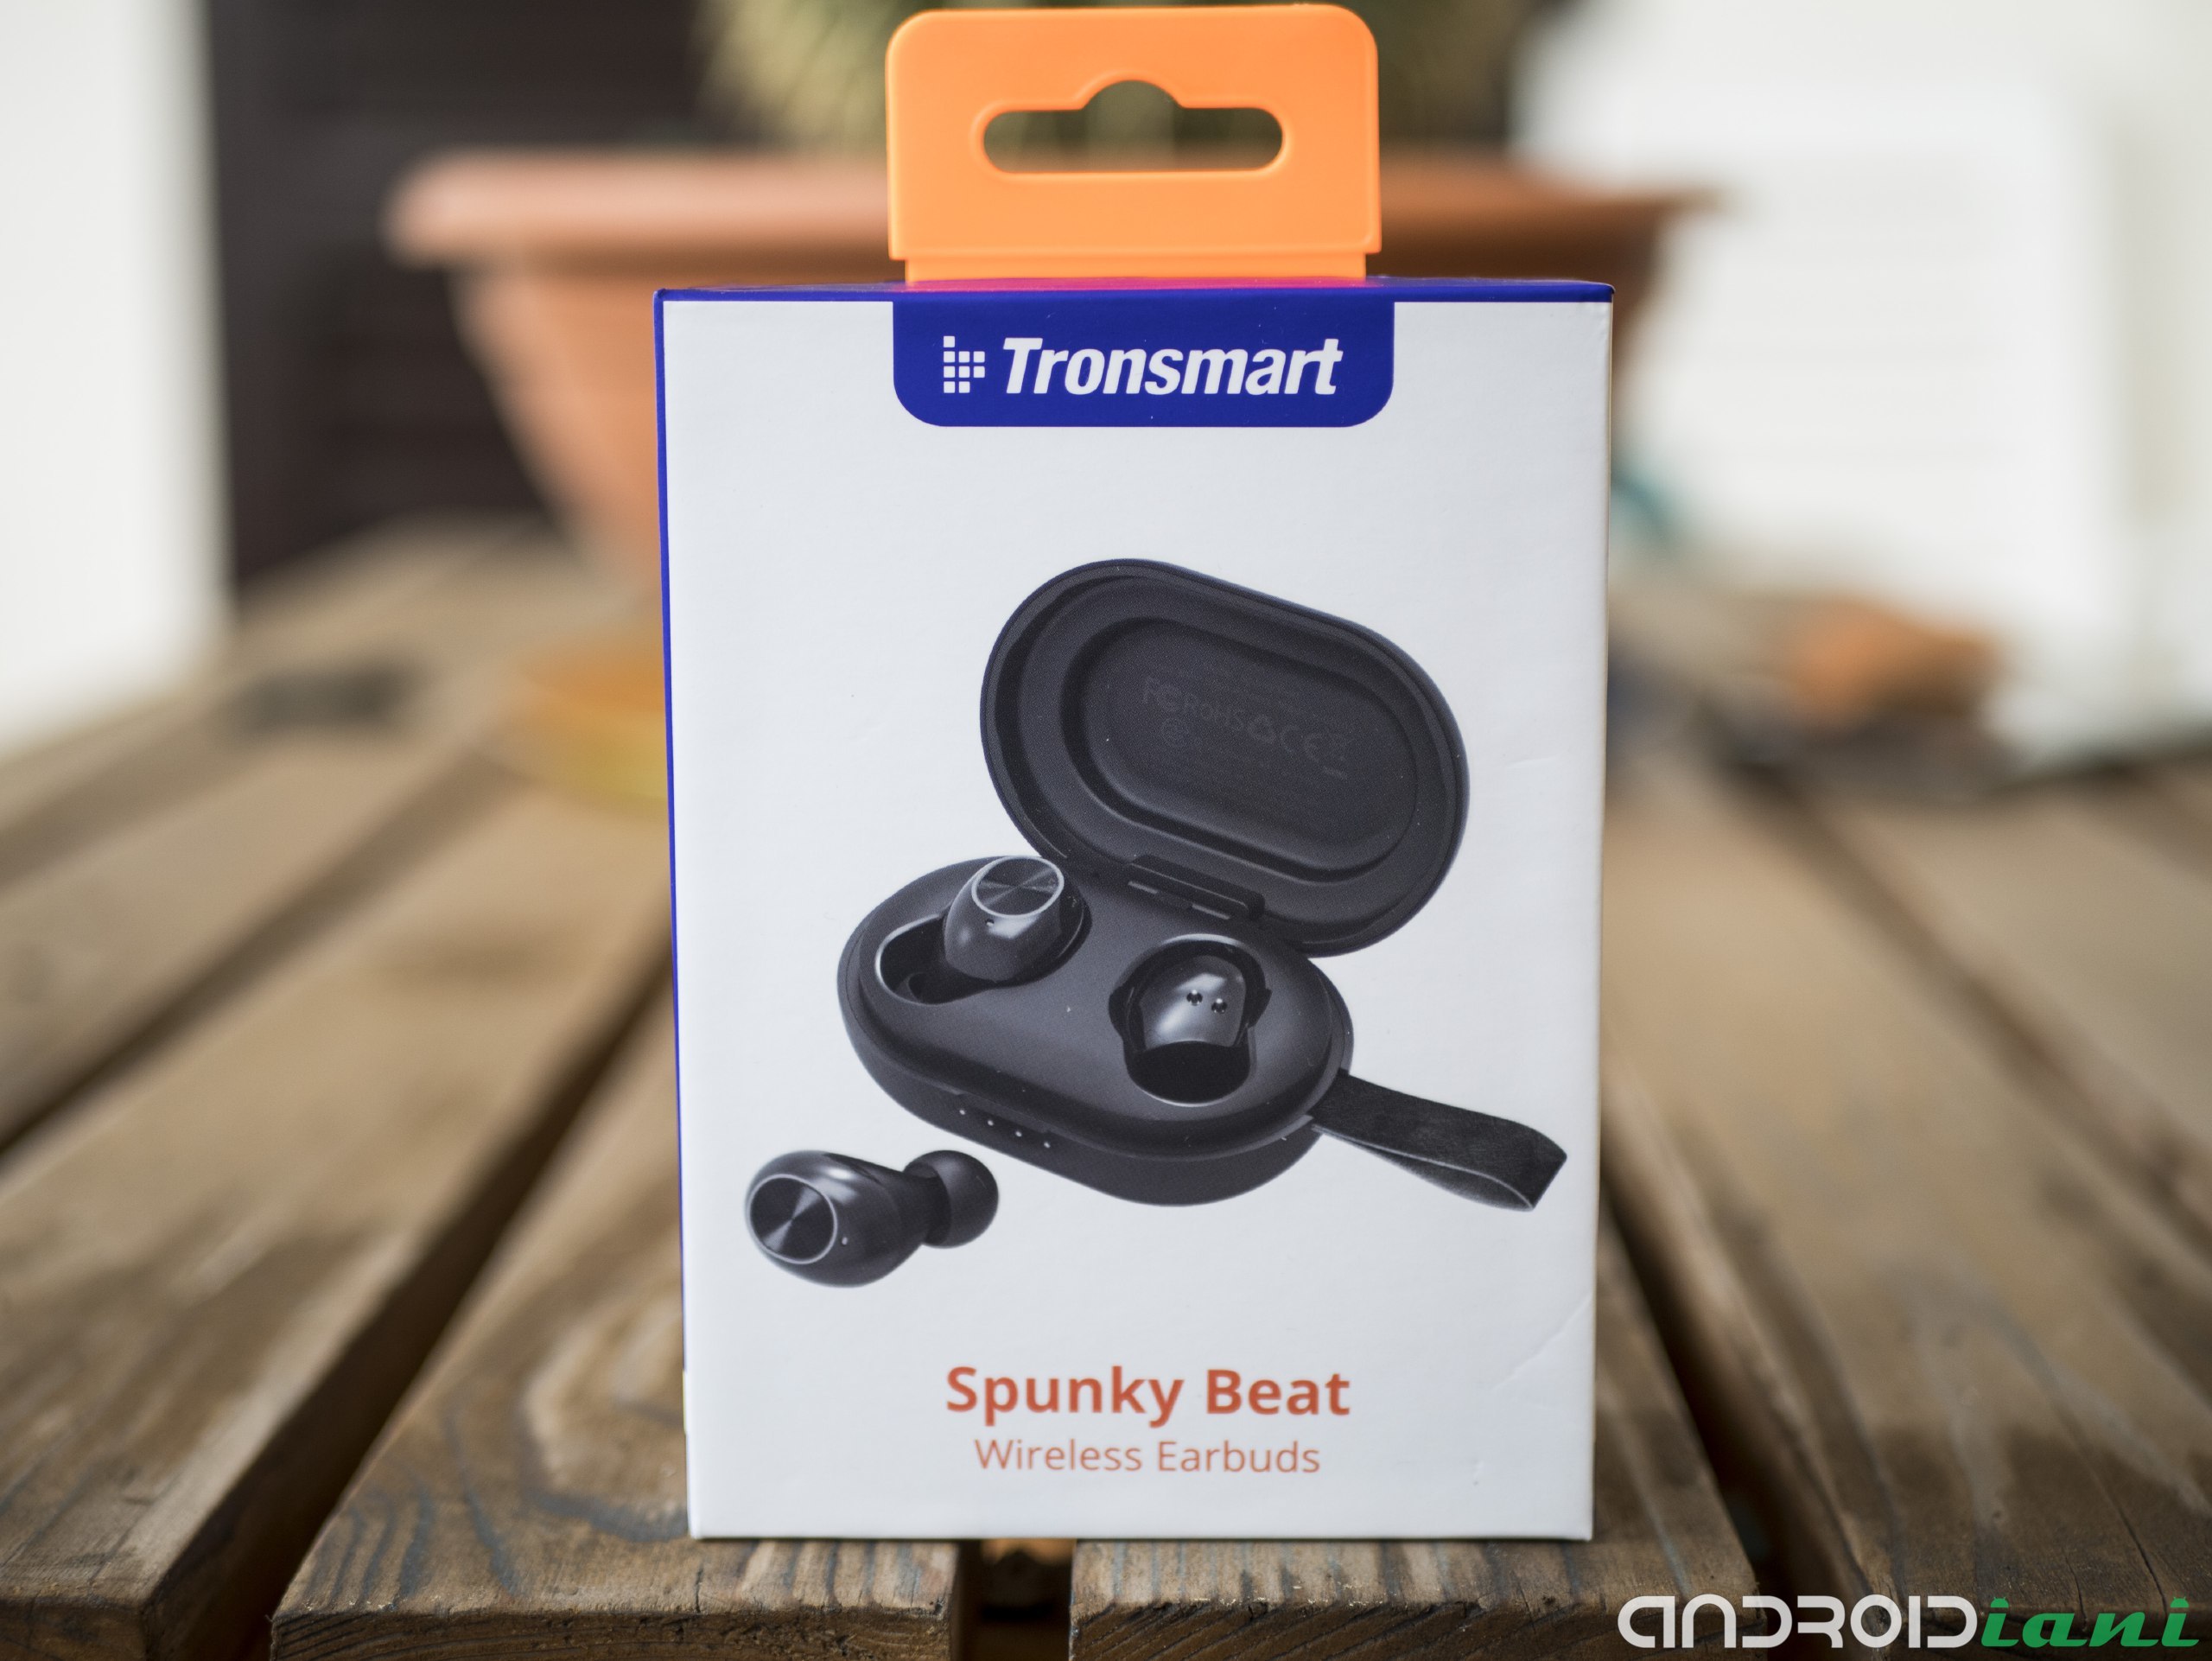 Tronsmart Spunky Pete: Đánh giá 2"width =" 2560 "height =" 1922 "srcset =" http://static.androidiani.com/wp-content/uploads/2019/11/Androidiani-2019-11-03-16.jpg 2560w, http: / /static.androidiani.com/wp-content/uploads/2019/11/Androidiani-2019-11-03-16-300x225.jpg 300w, http://static.androidiani.com/wp-content/uploads/2019/ 11 / Androidiani-2019-11-03-16-768x577.jpg 768w, http://static.androidiani.com/wp-content/uploads/2019/11/Androidiani-2019-11-03-16-1024x769.jpg 1024w, http://static.androidiani.com/wp-content/uploads/2019/11/Androidiani-2019-11-03-16-630x473.jpg 630w "size =" (max-width: 2560px) 100vw, 2560px